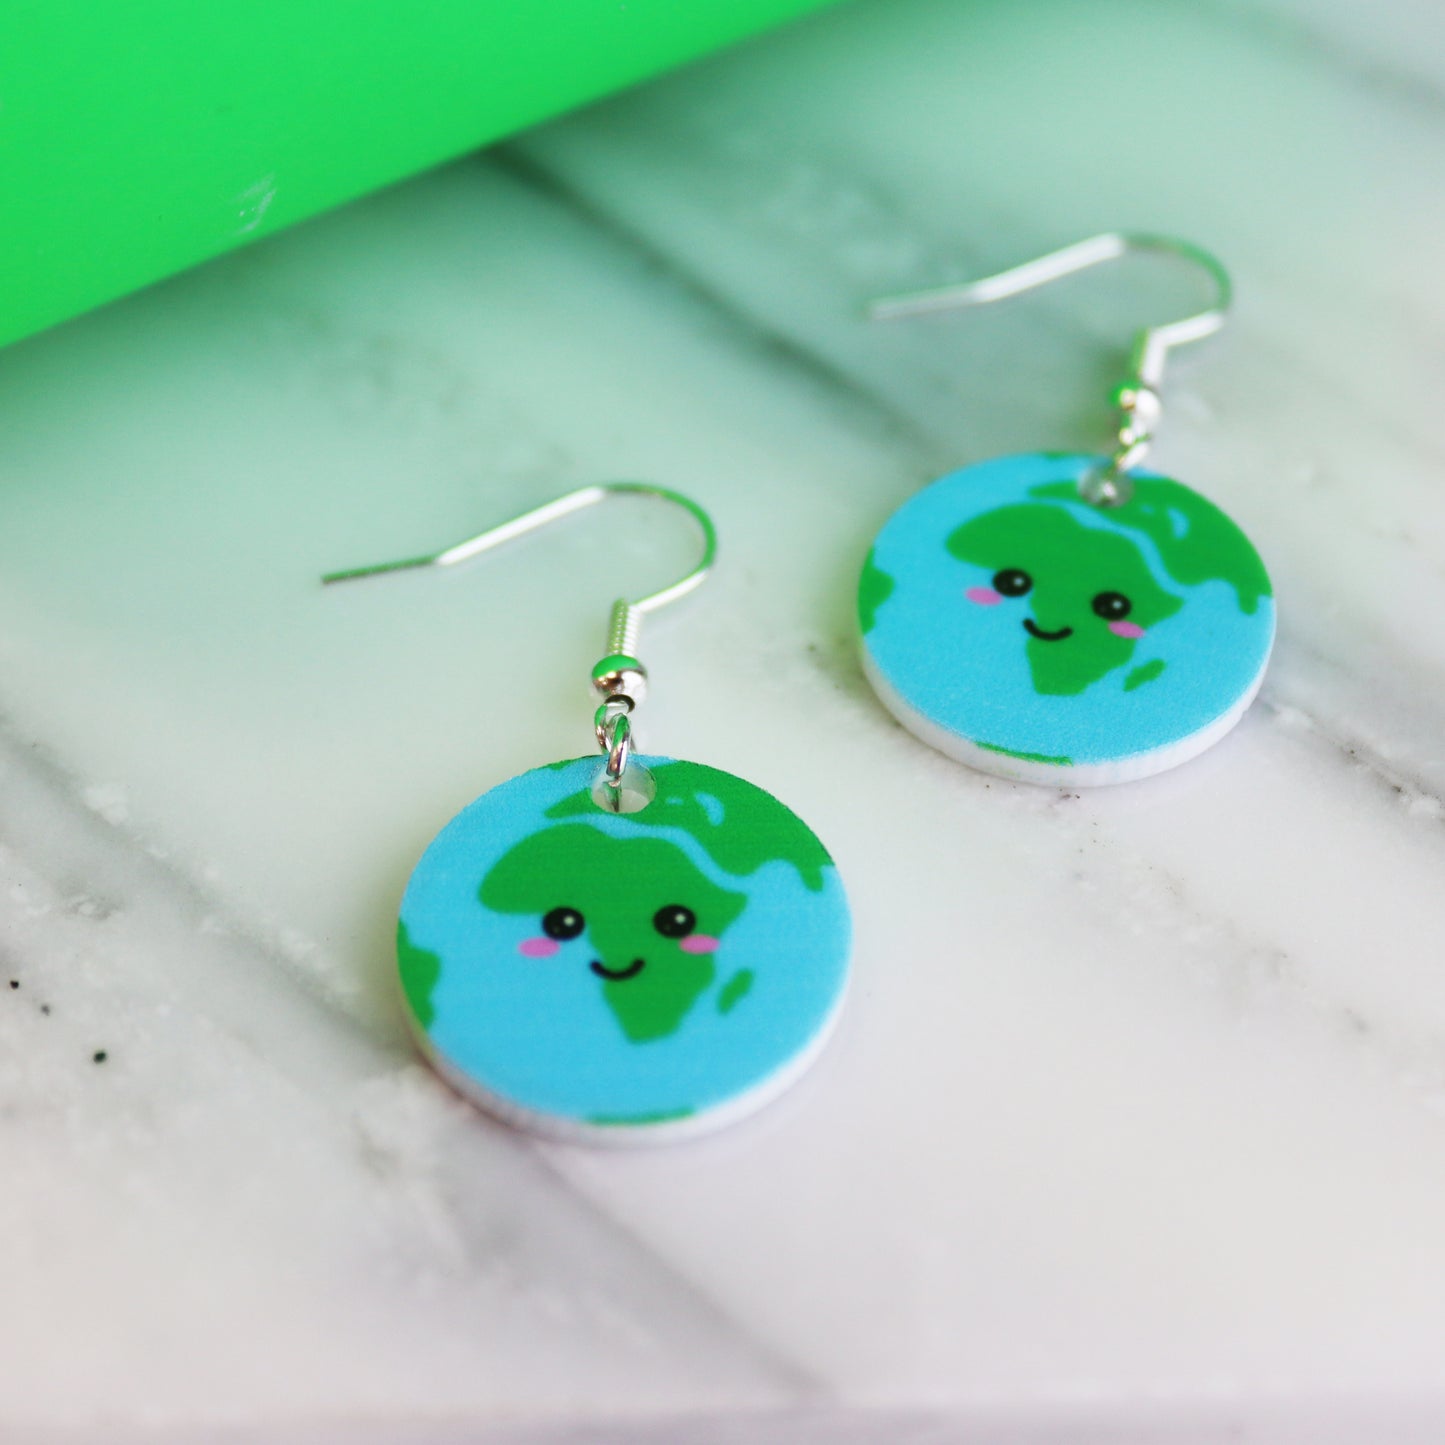 You are my whole world fun kawaii based earth earrings shown on marble background